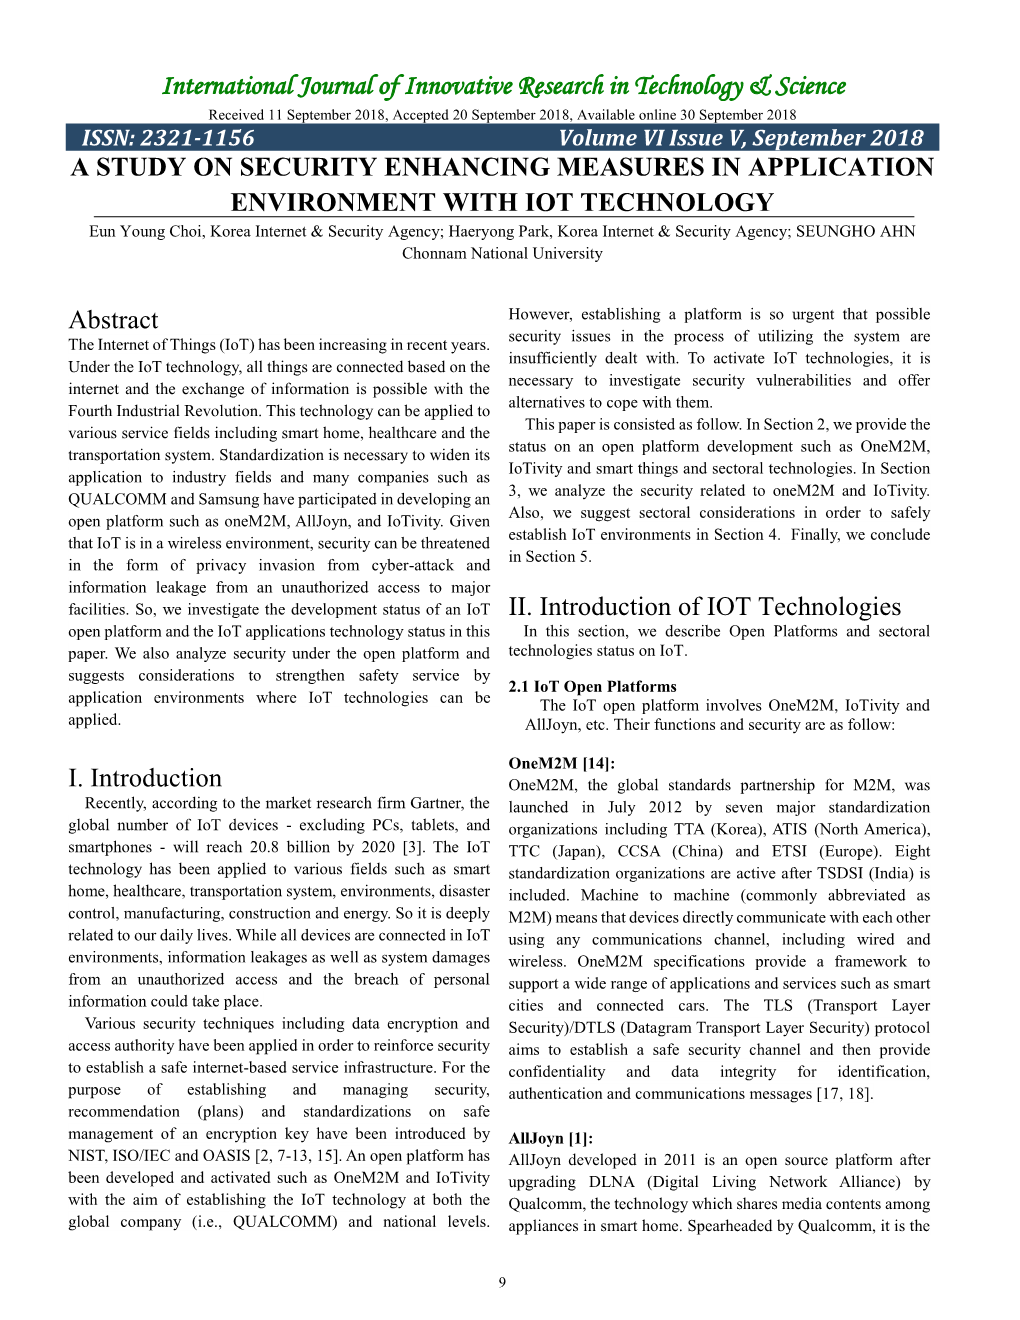 A Study on Security Enhancing Measures in Application